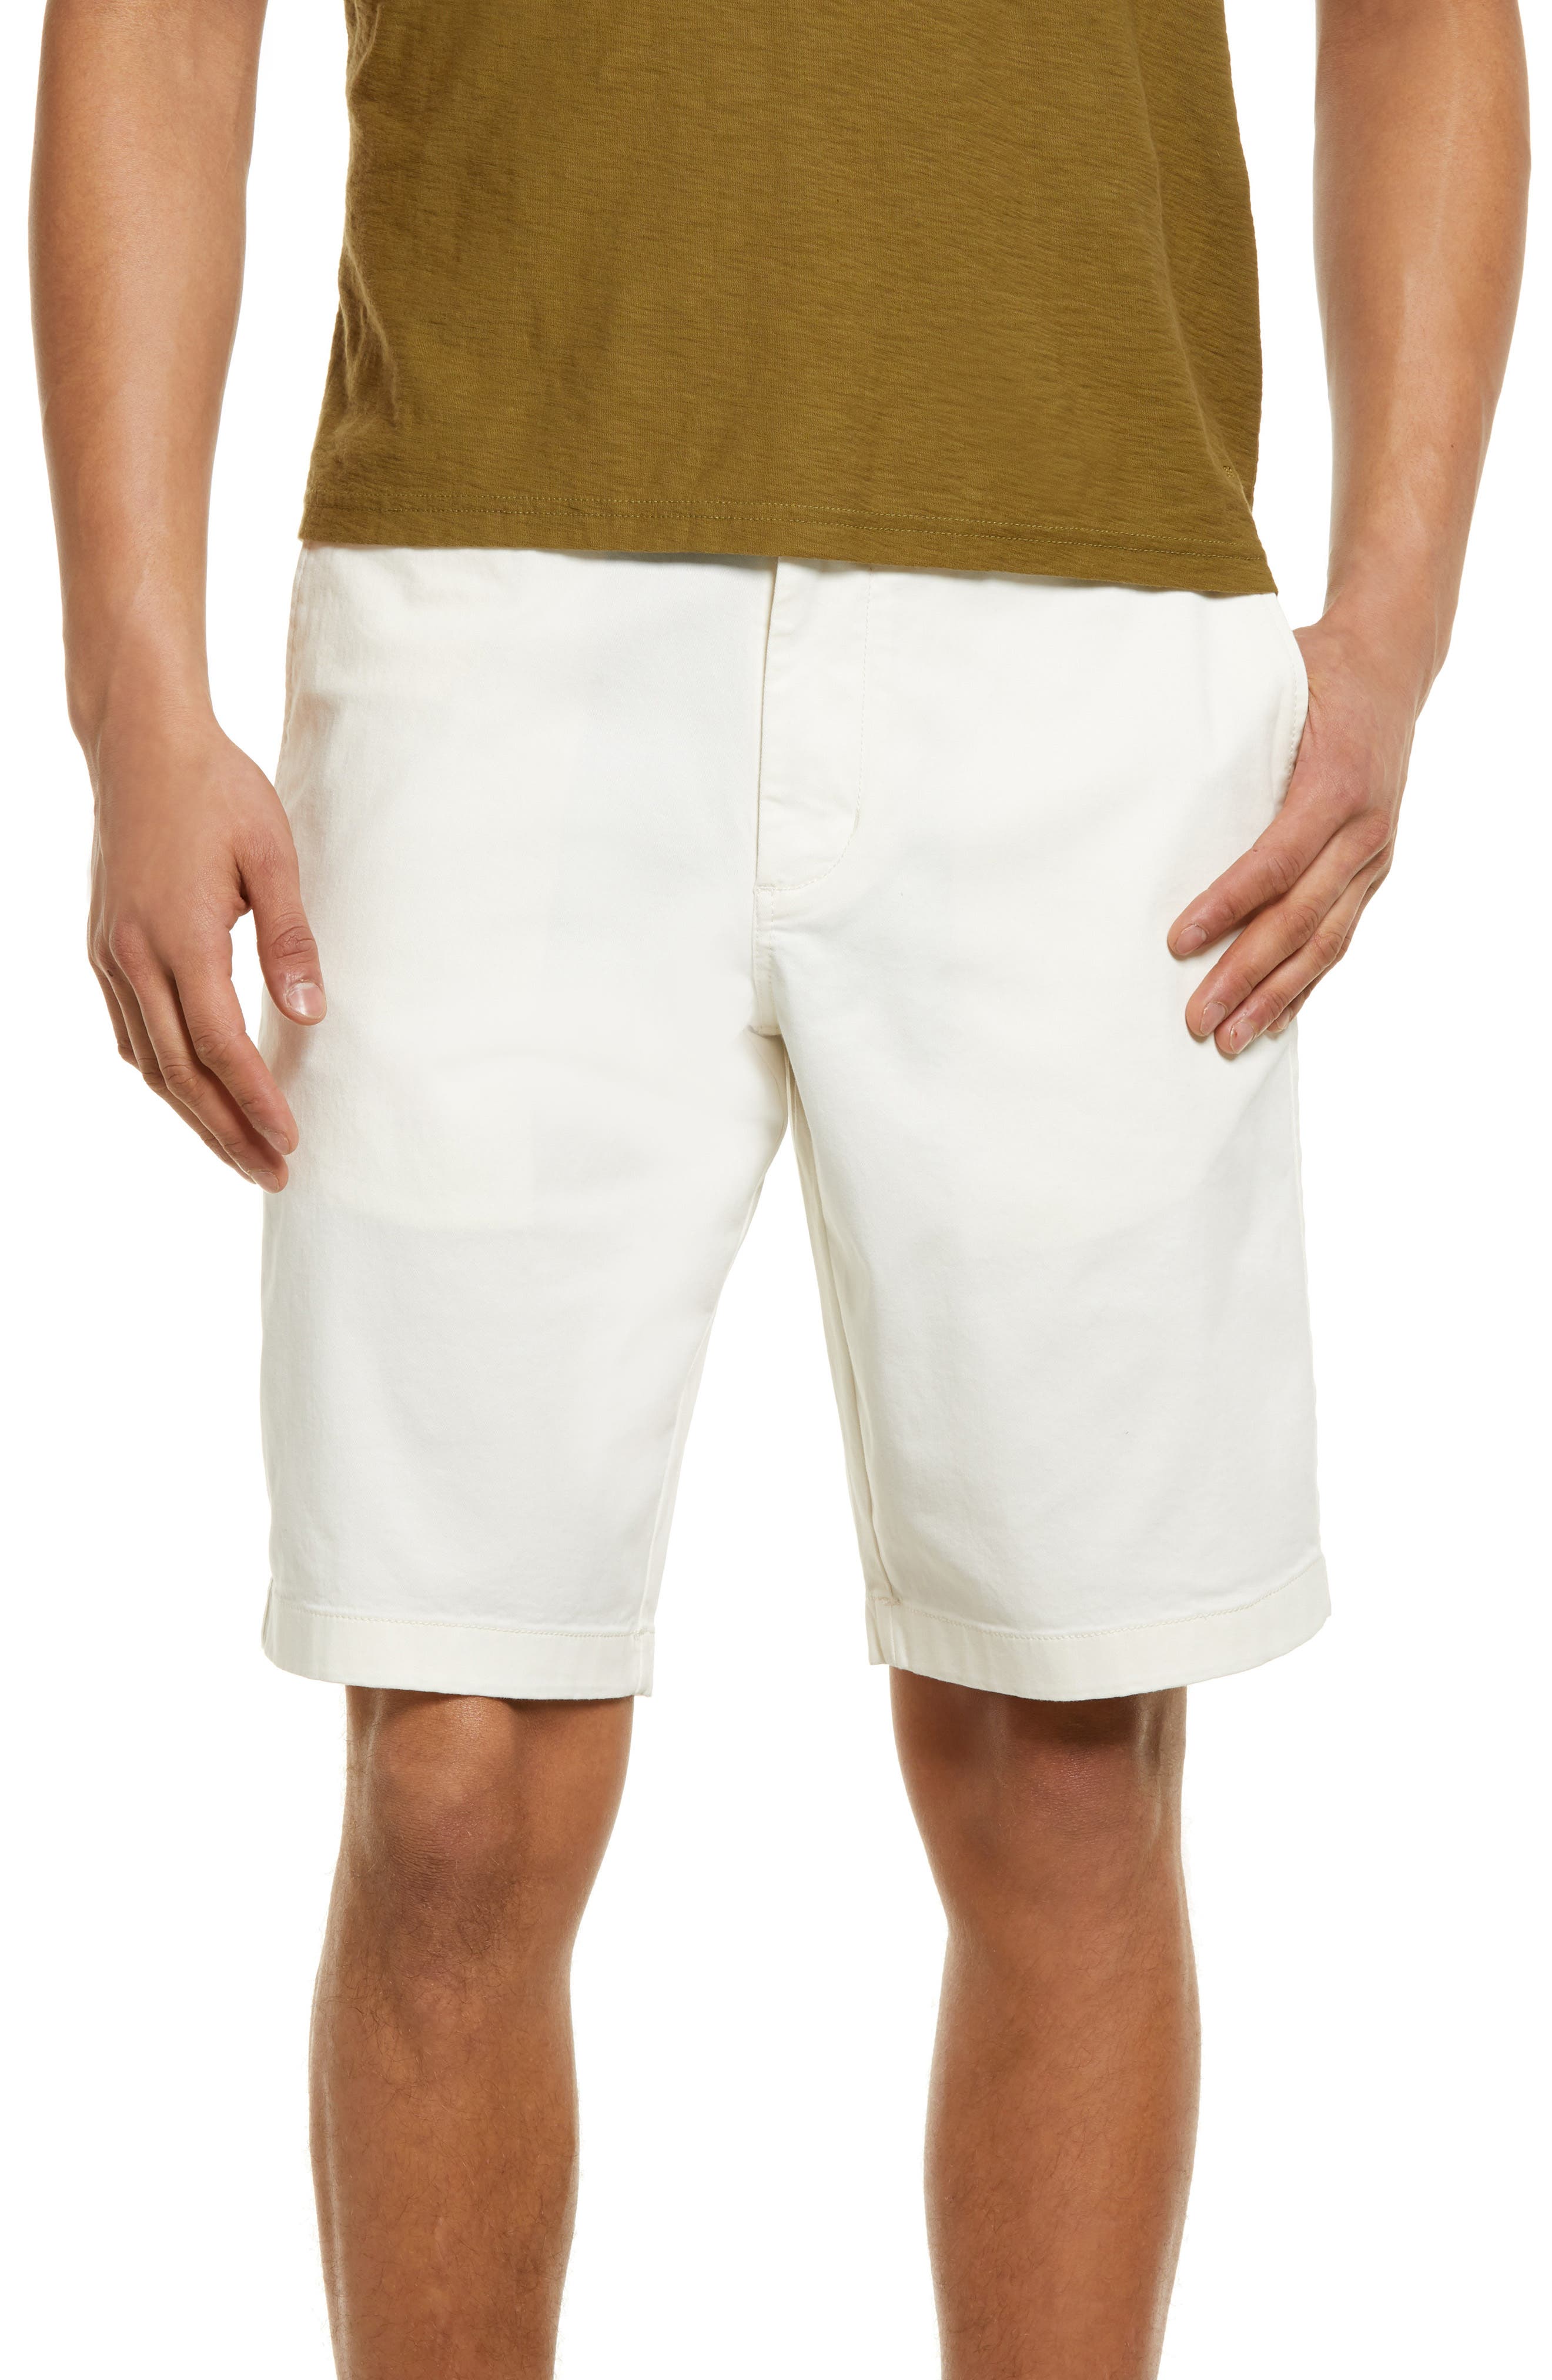 New Boys Mens ex faMouS store smart cargo shorts waist 30" or 31" high quality